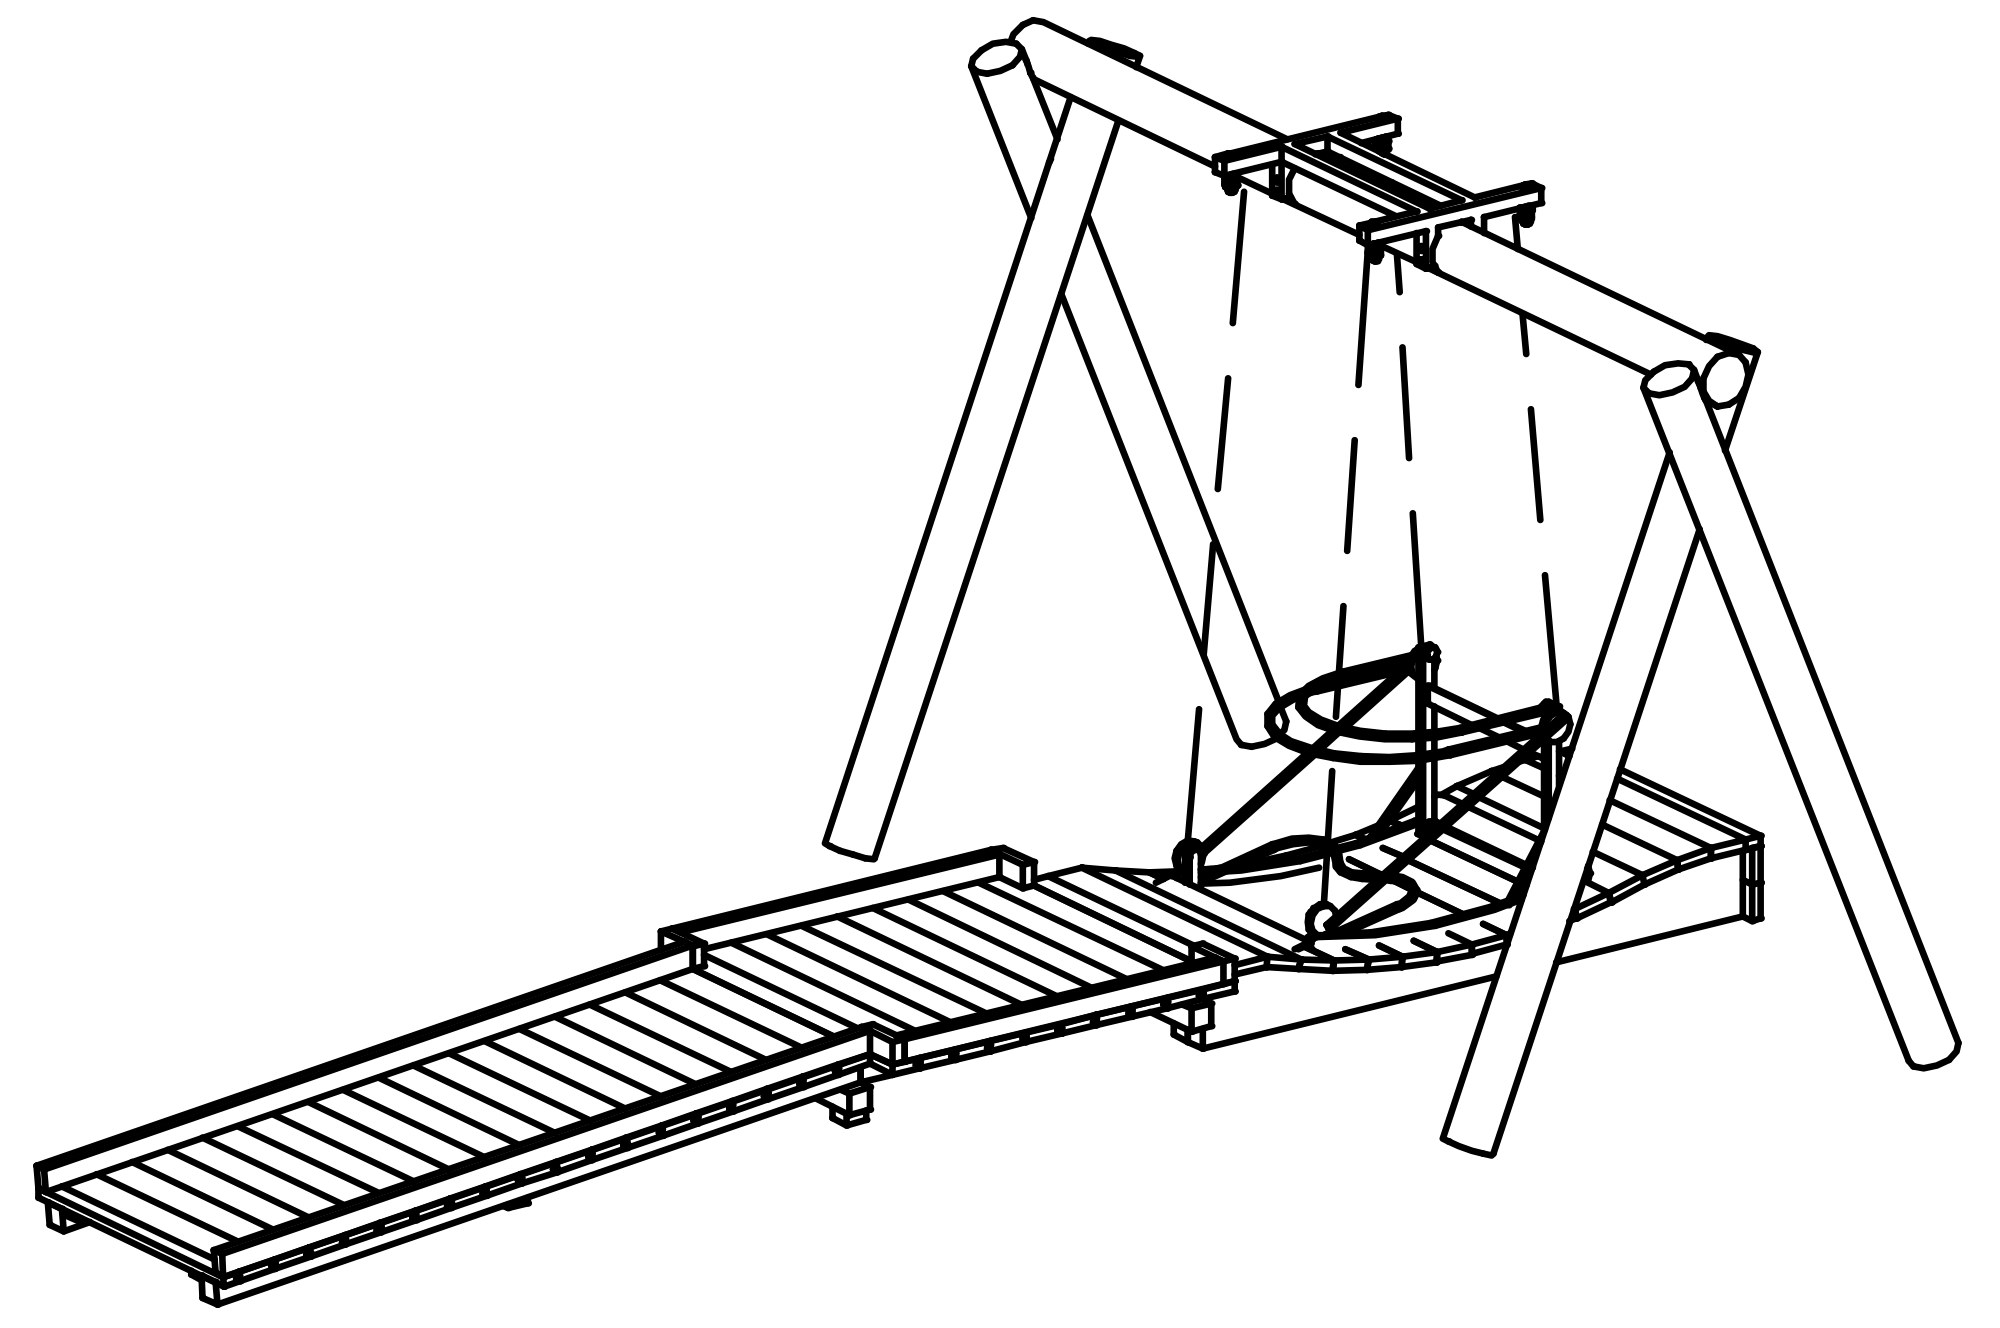 Wheelchair Swing incl. wooden construction, permitted only in supervised areas